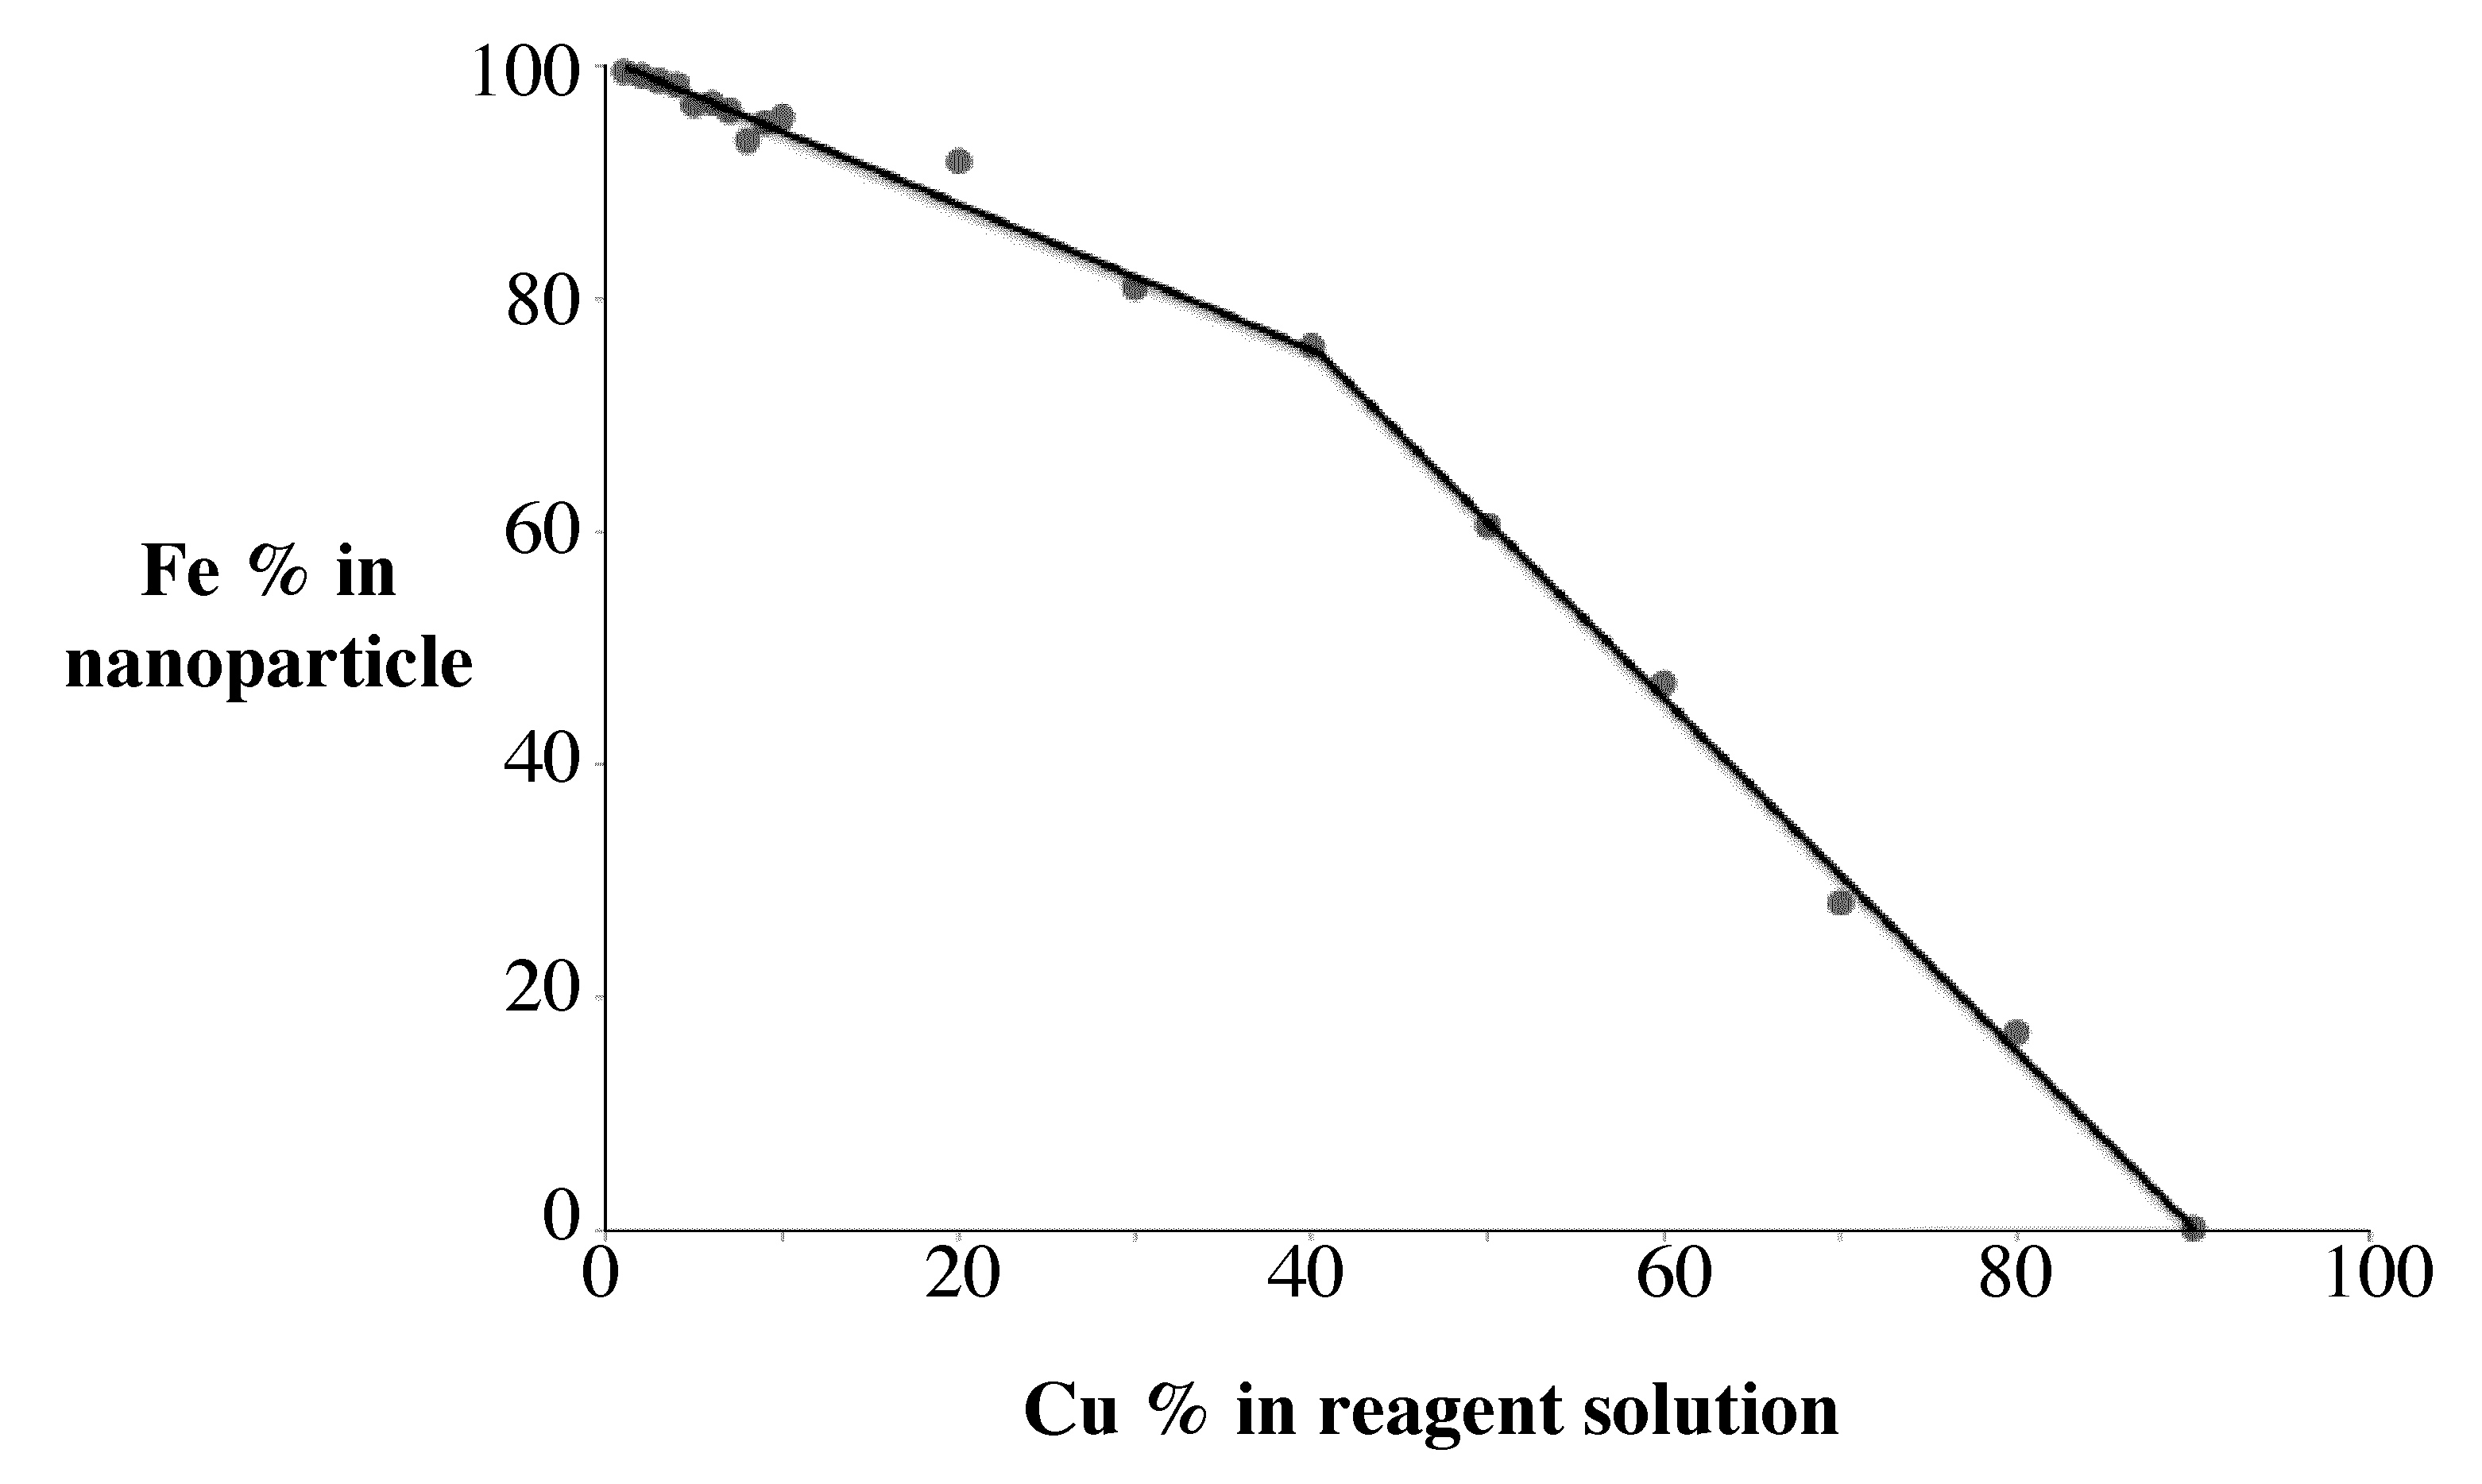 Percentage iron in nanoparticles